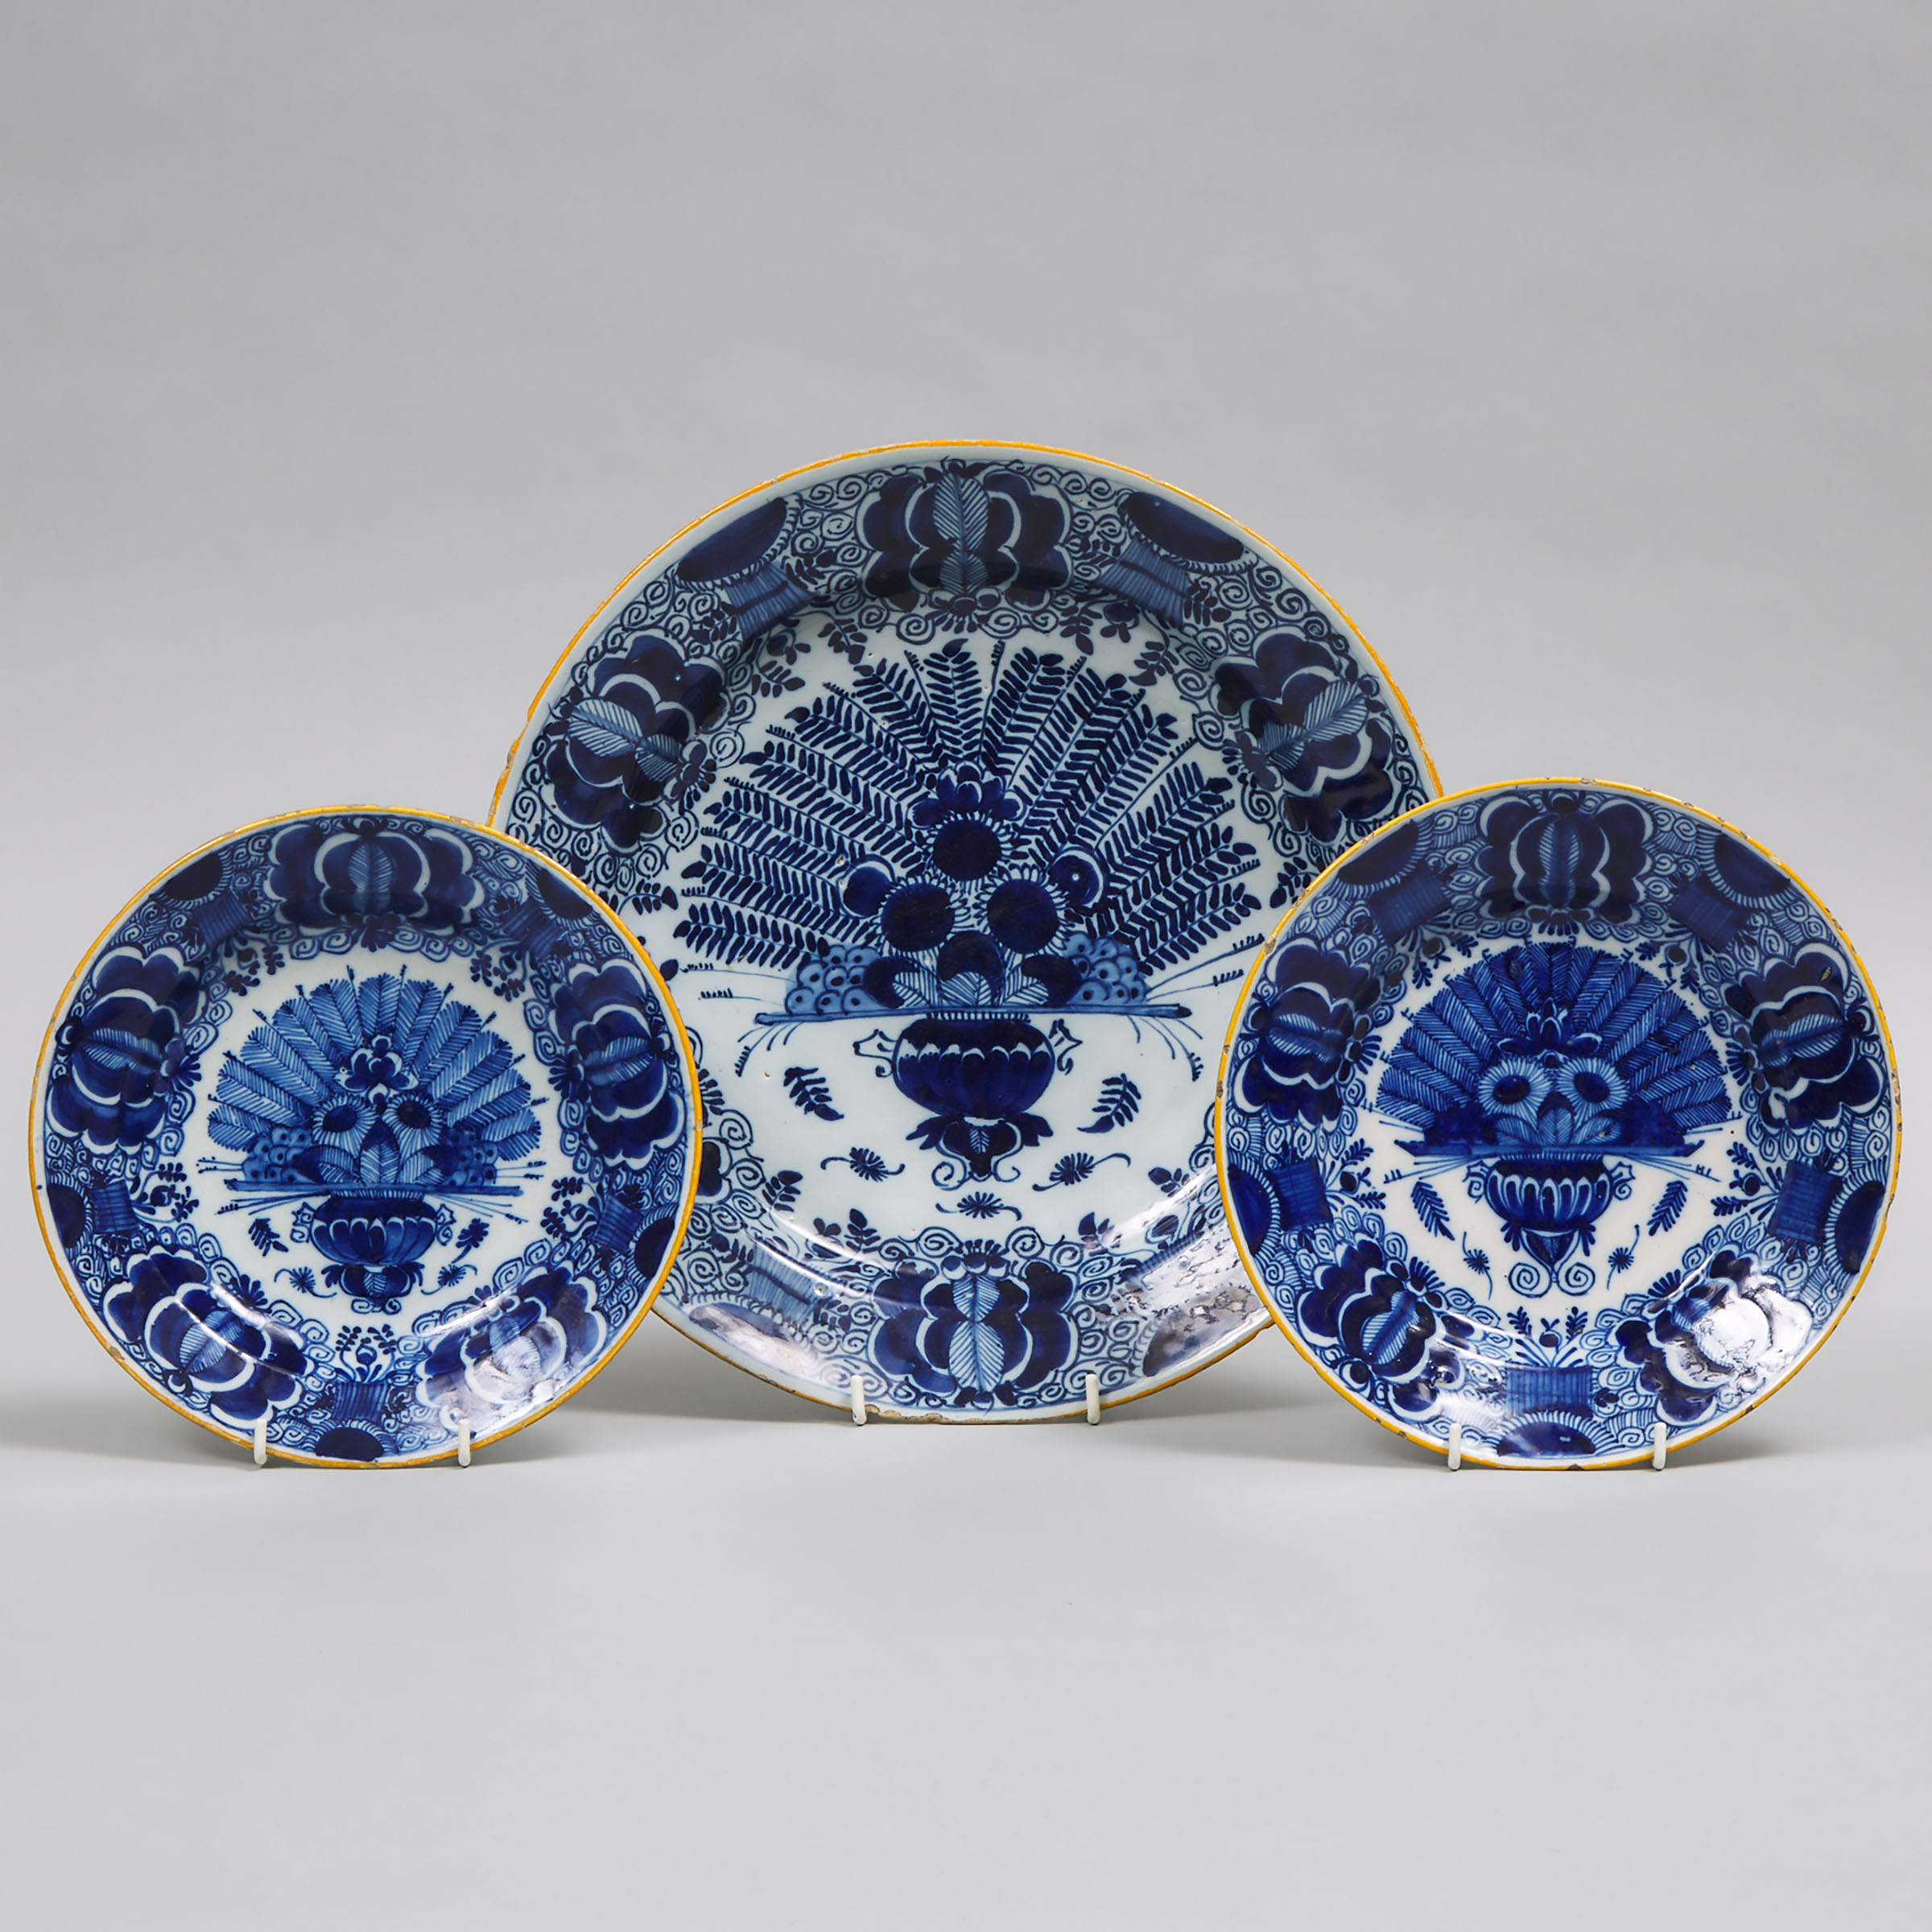 De Porceleyne Klaauw Delft Blue Painted 'Peacock' Pattern Charger and a Pair of Plates, 18th century